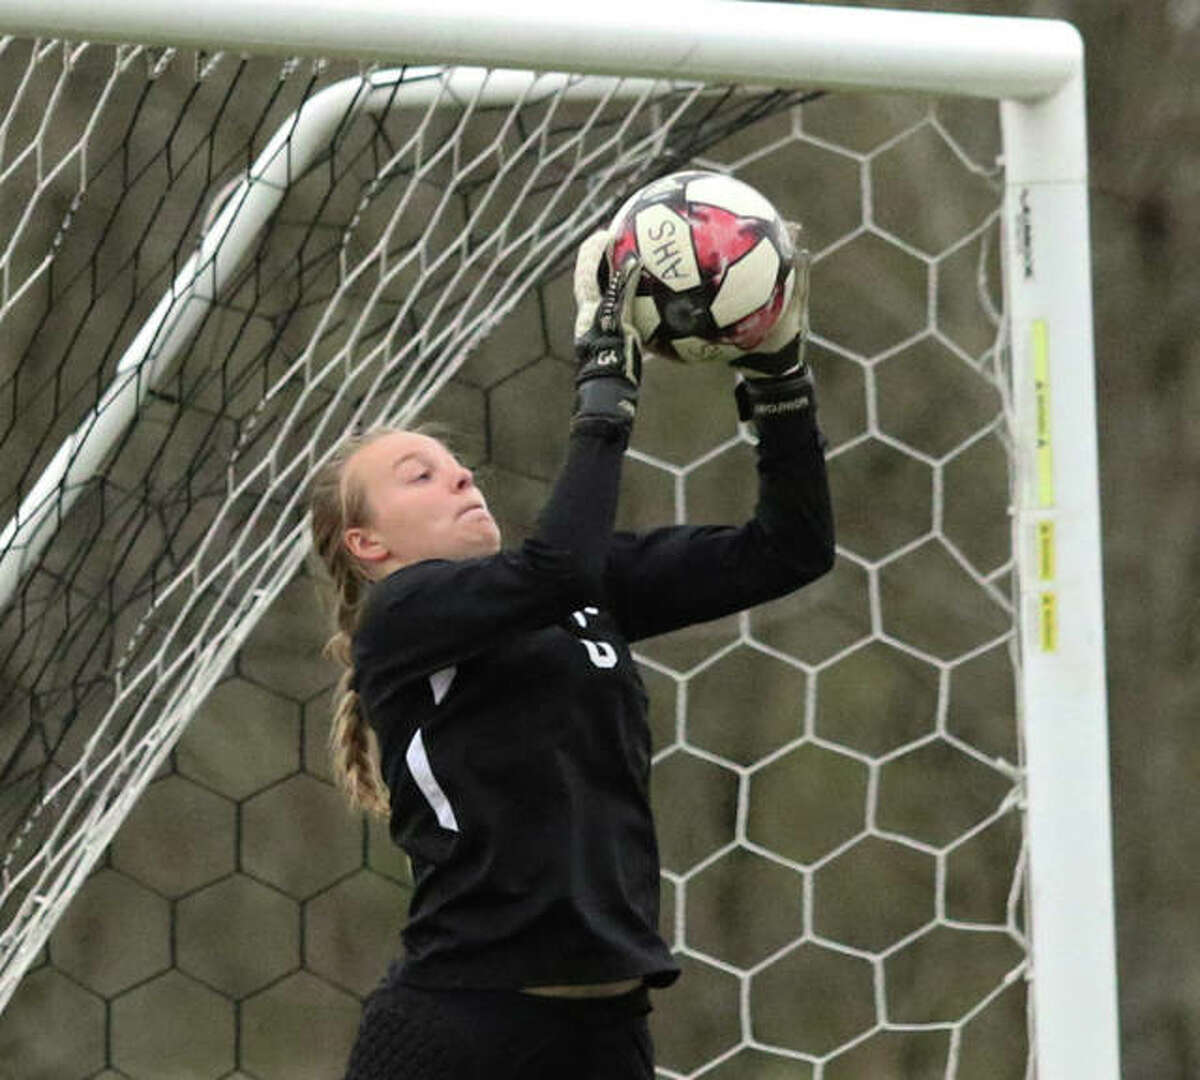 Alton goalie Addison Miller makes a save during a 2019 game. Miller, now a senior, is one of three senior captains on the AHS team this season. The Redbirds, like all Illinois high school girls soccer teams, are returning this week for the first time since 2019 after the 2020 season was cancelled because of the pandemic.